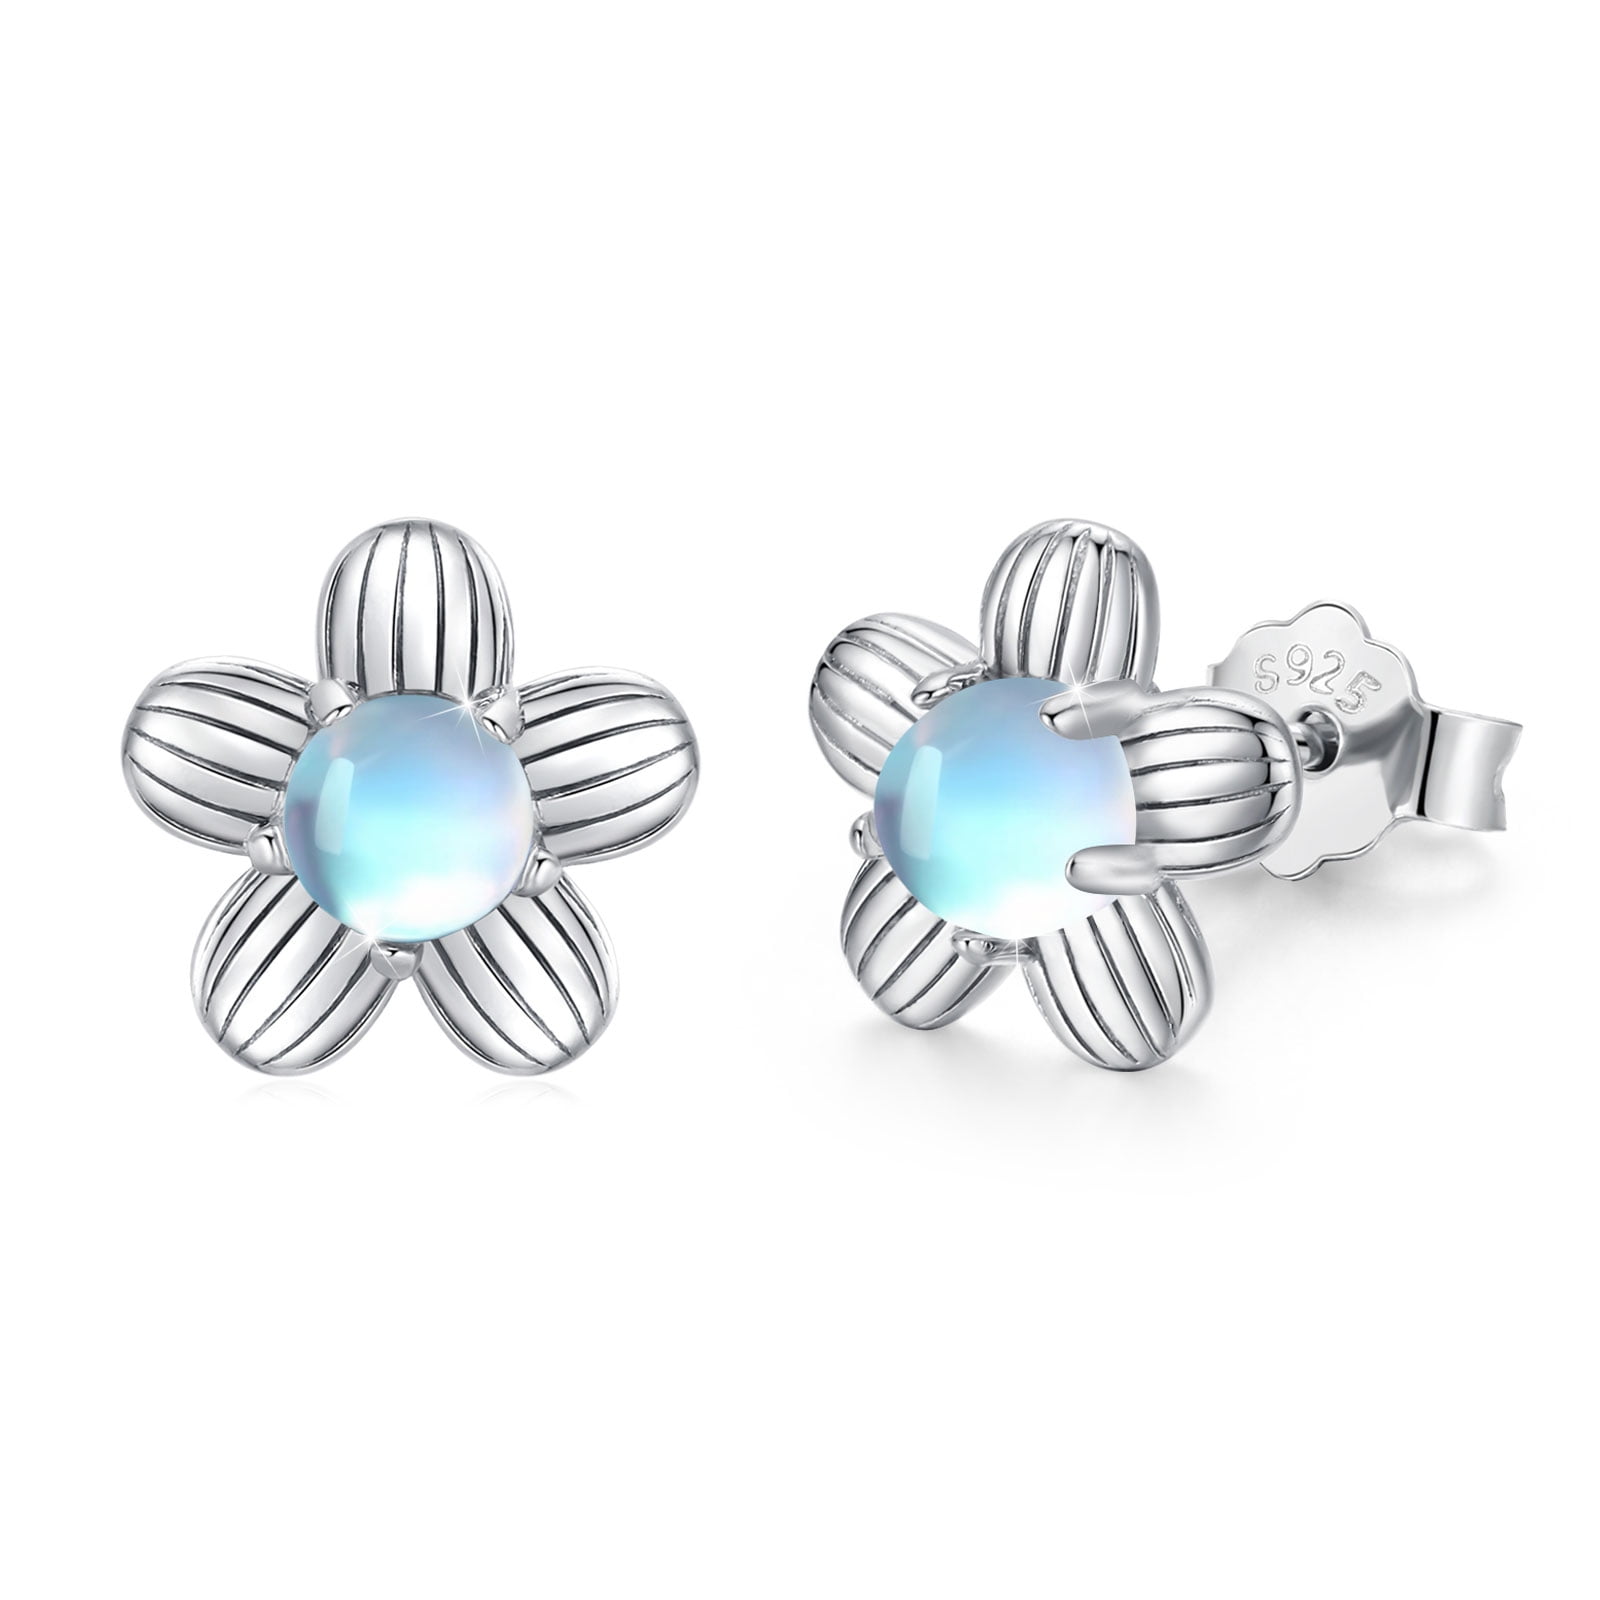 So Chic Jewels 925 Sterling Silver Elephant Ear Studs